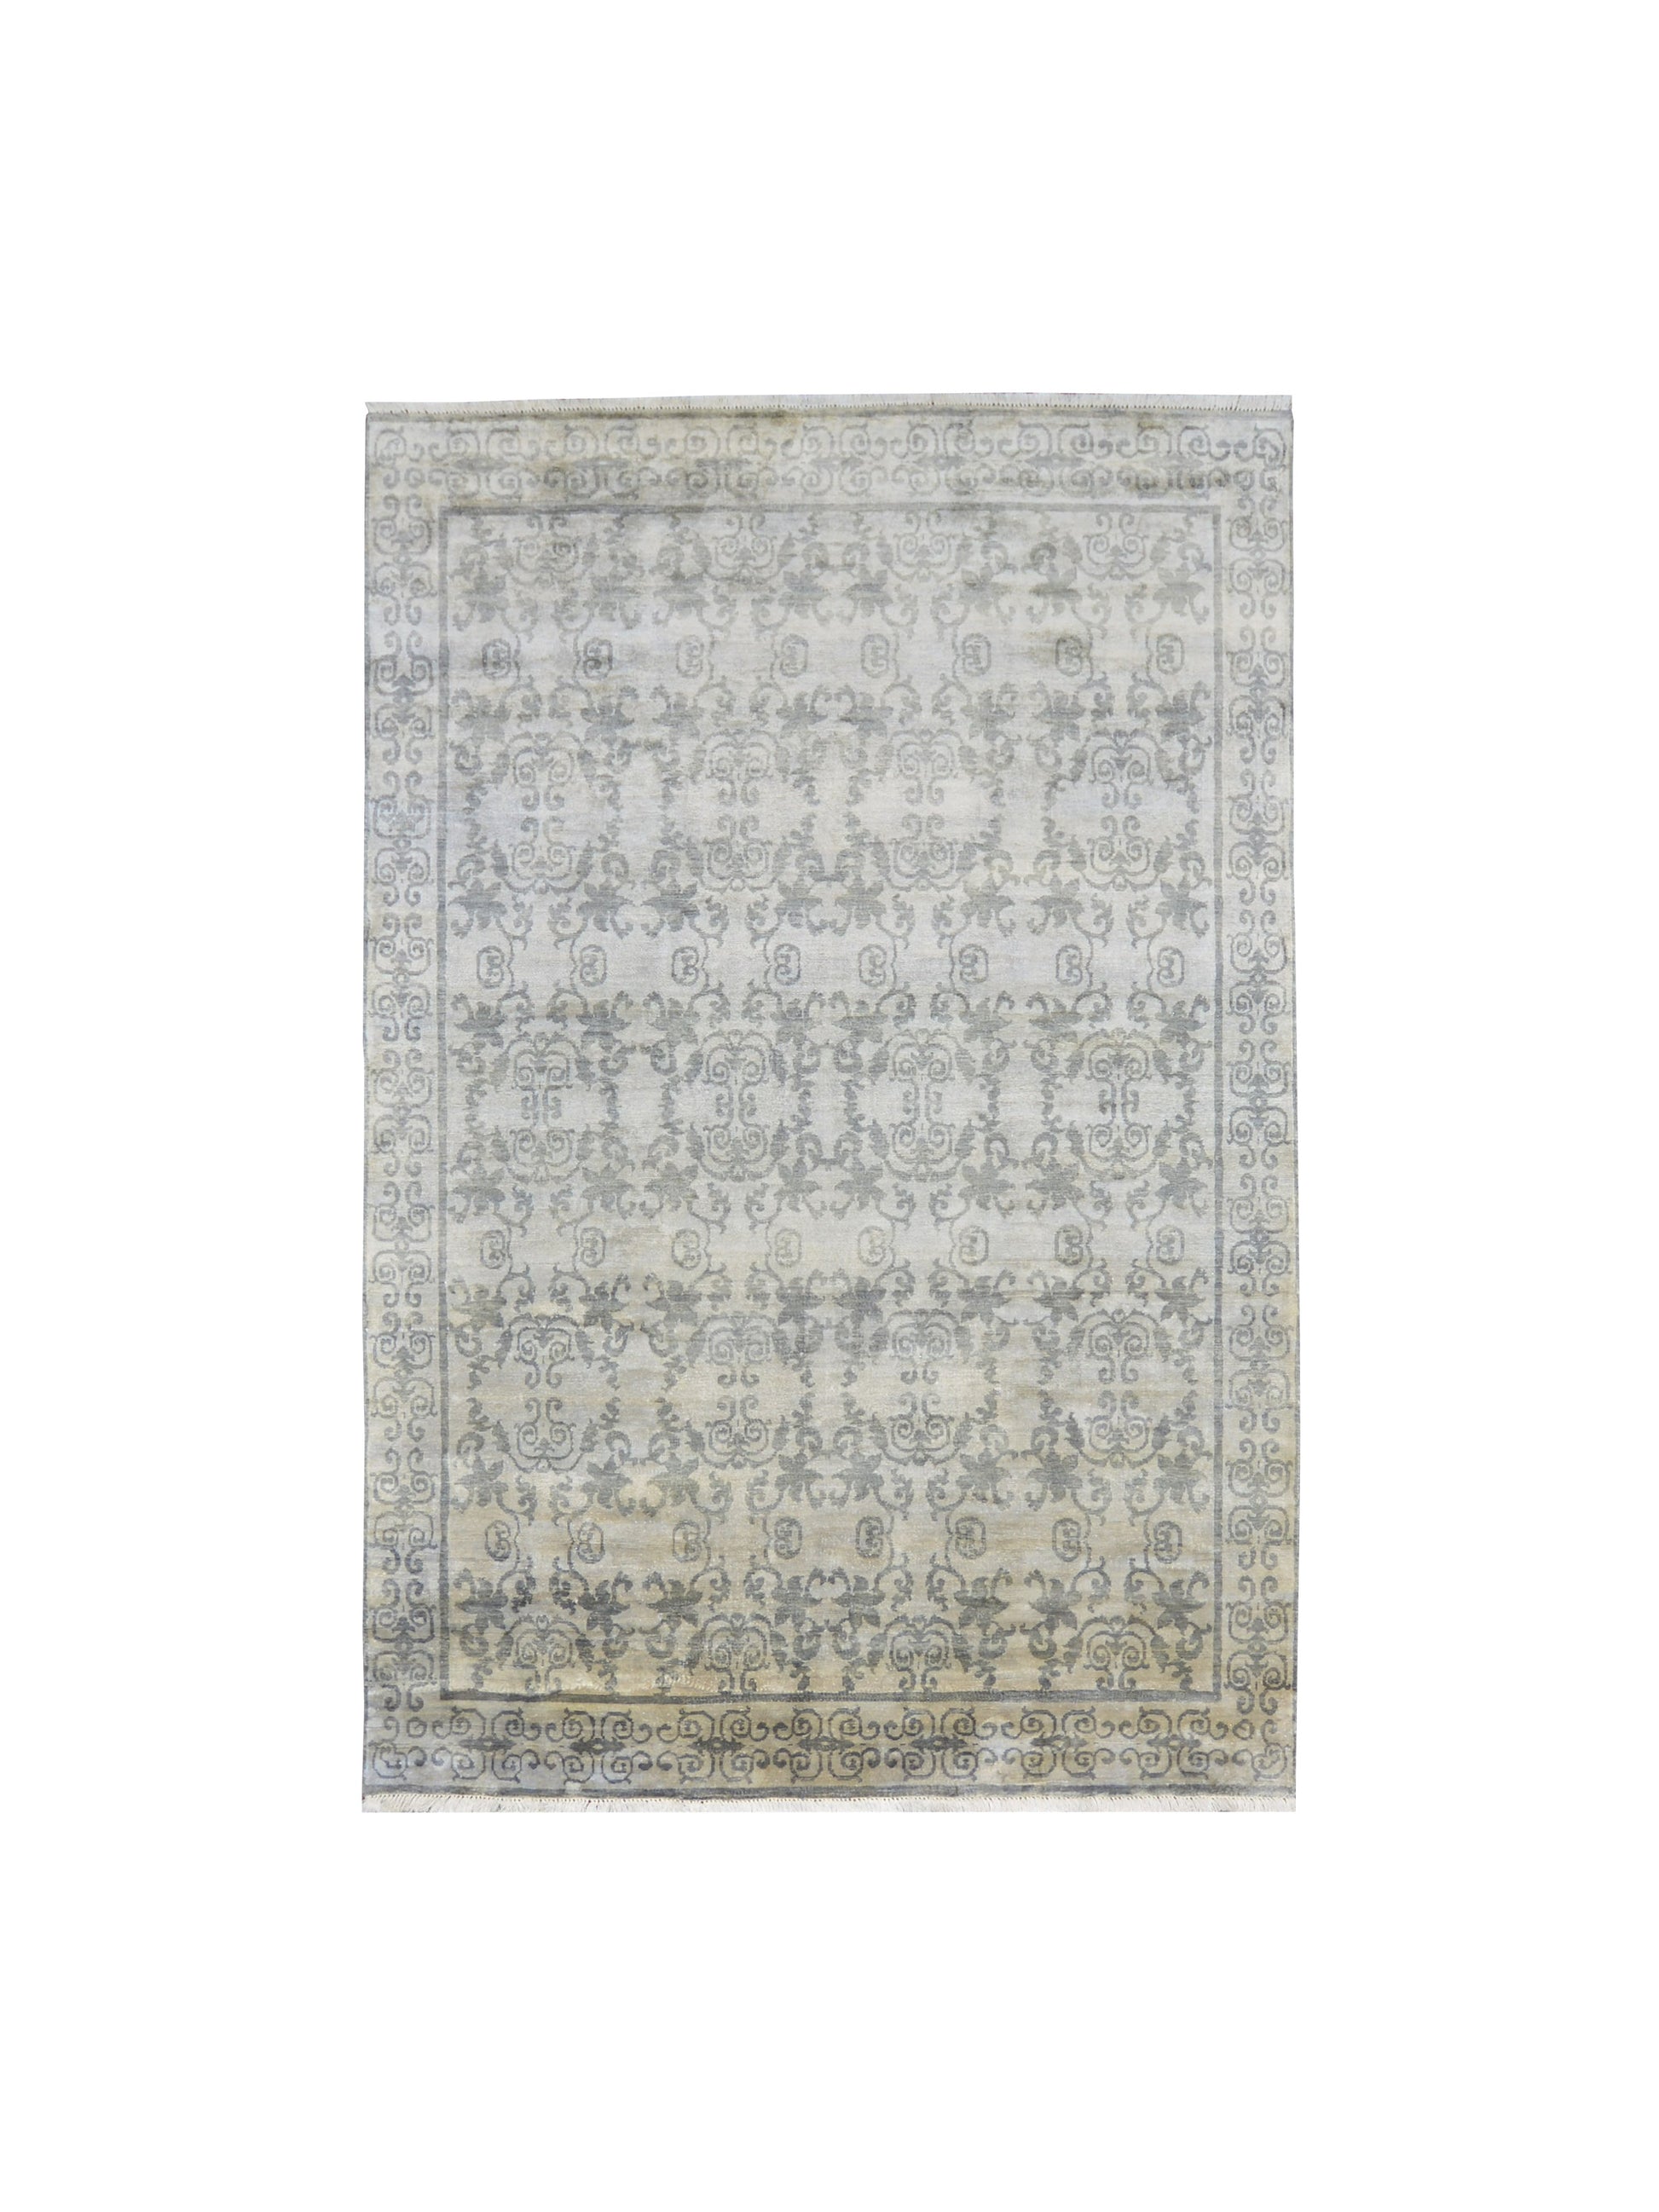 Get trendy with Grey and Grey Pure Silk Handknotted Area Rug 5.11x8.9ft 180x267Cms - Traditional Rugs available at Jaipur Oriental Rugs. Grab yours for $3730.00 today!